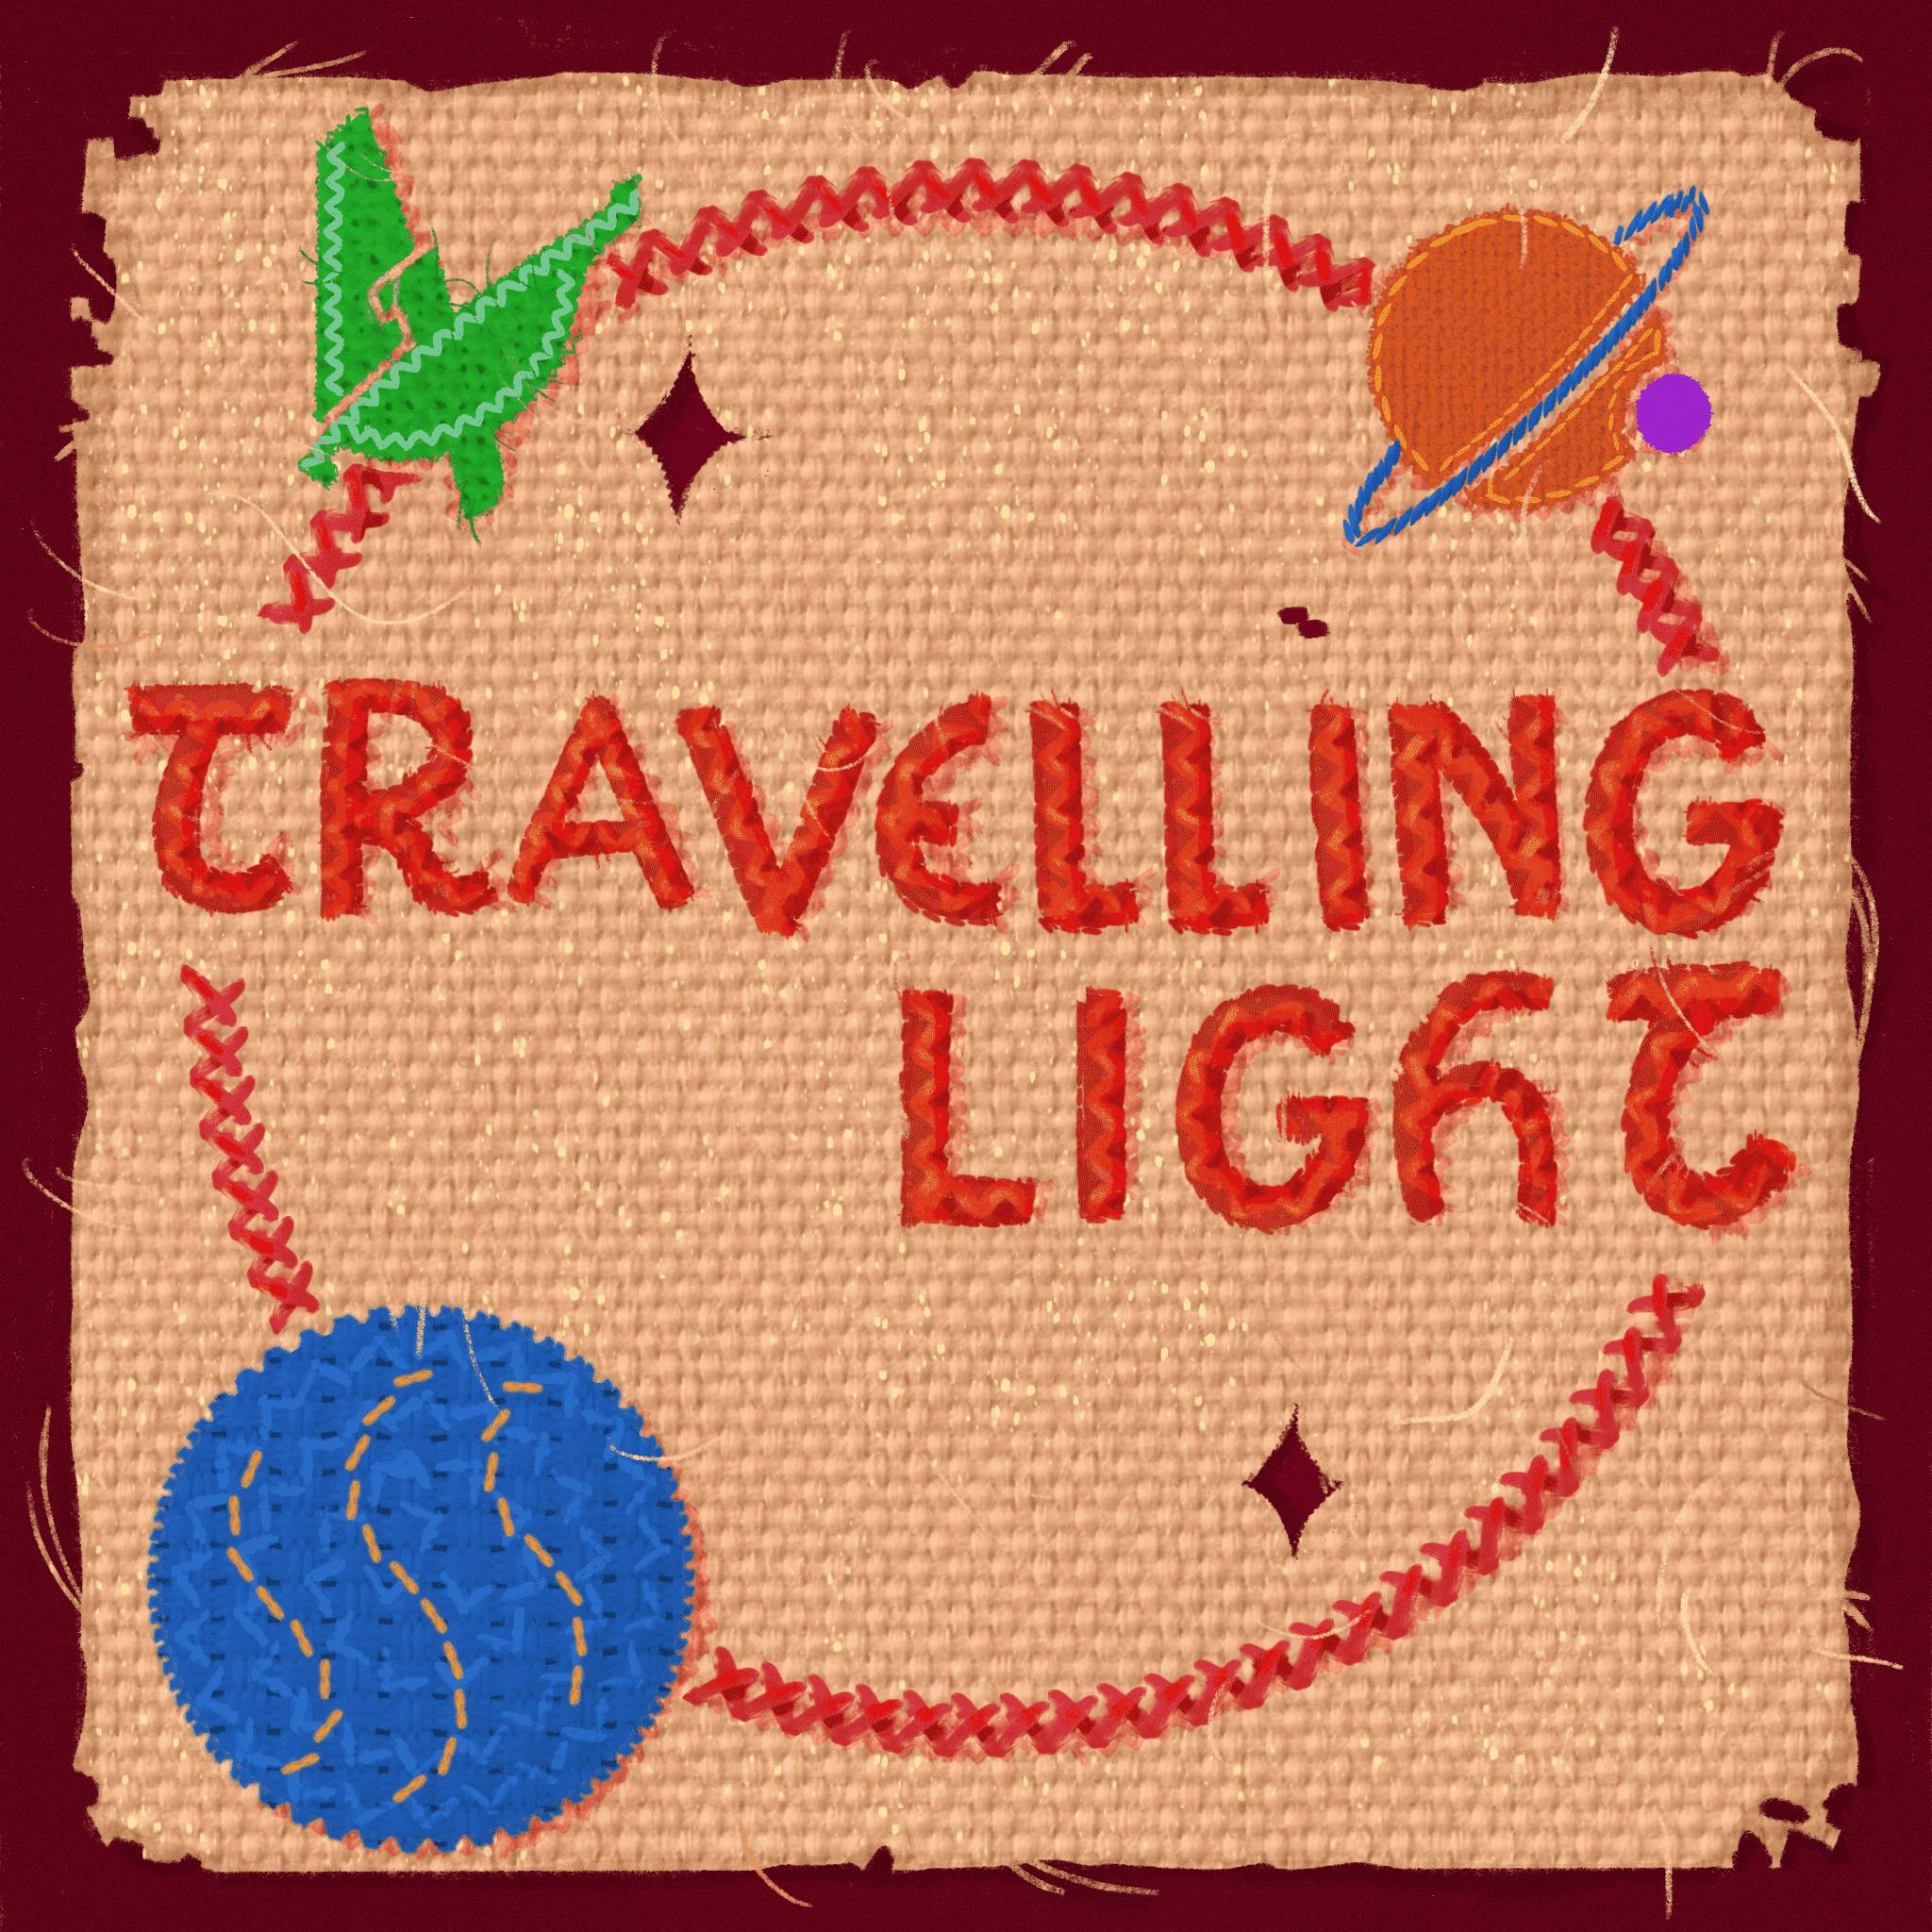 Introducing: Travelling Light